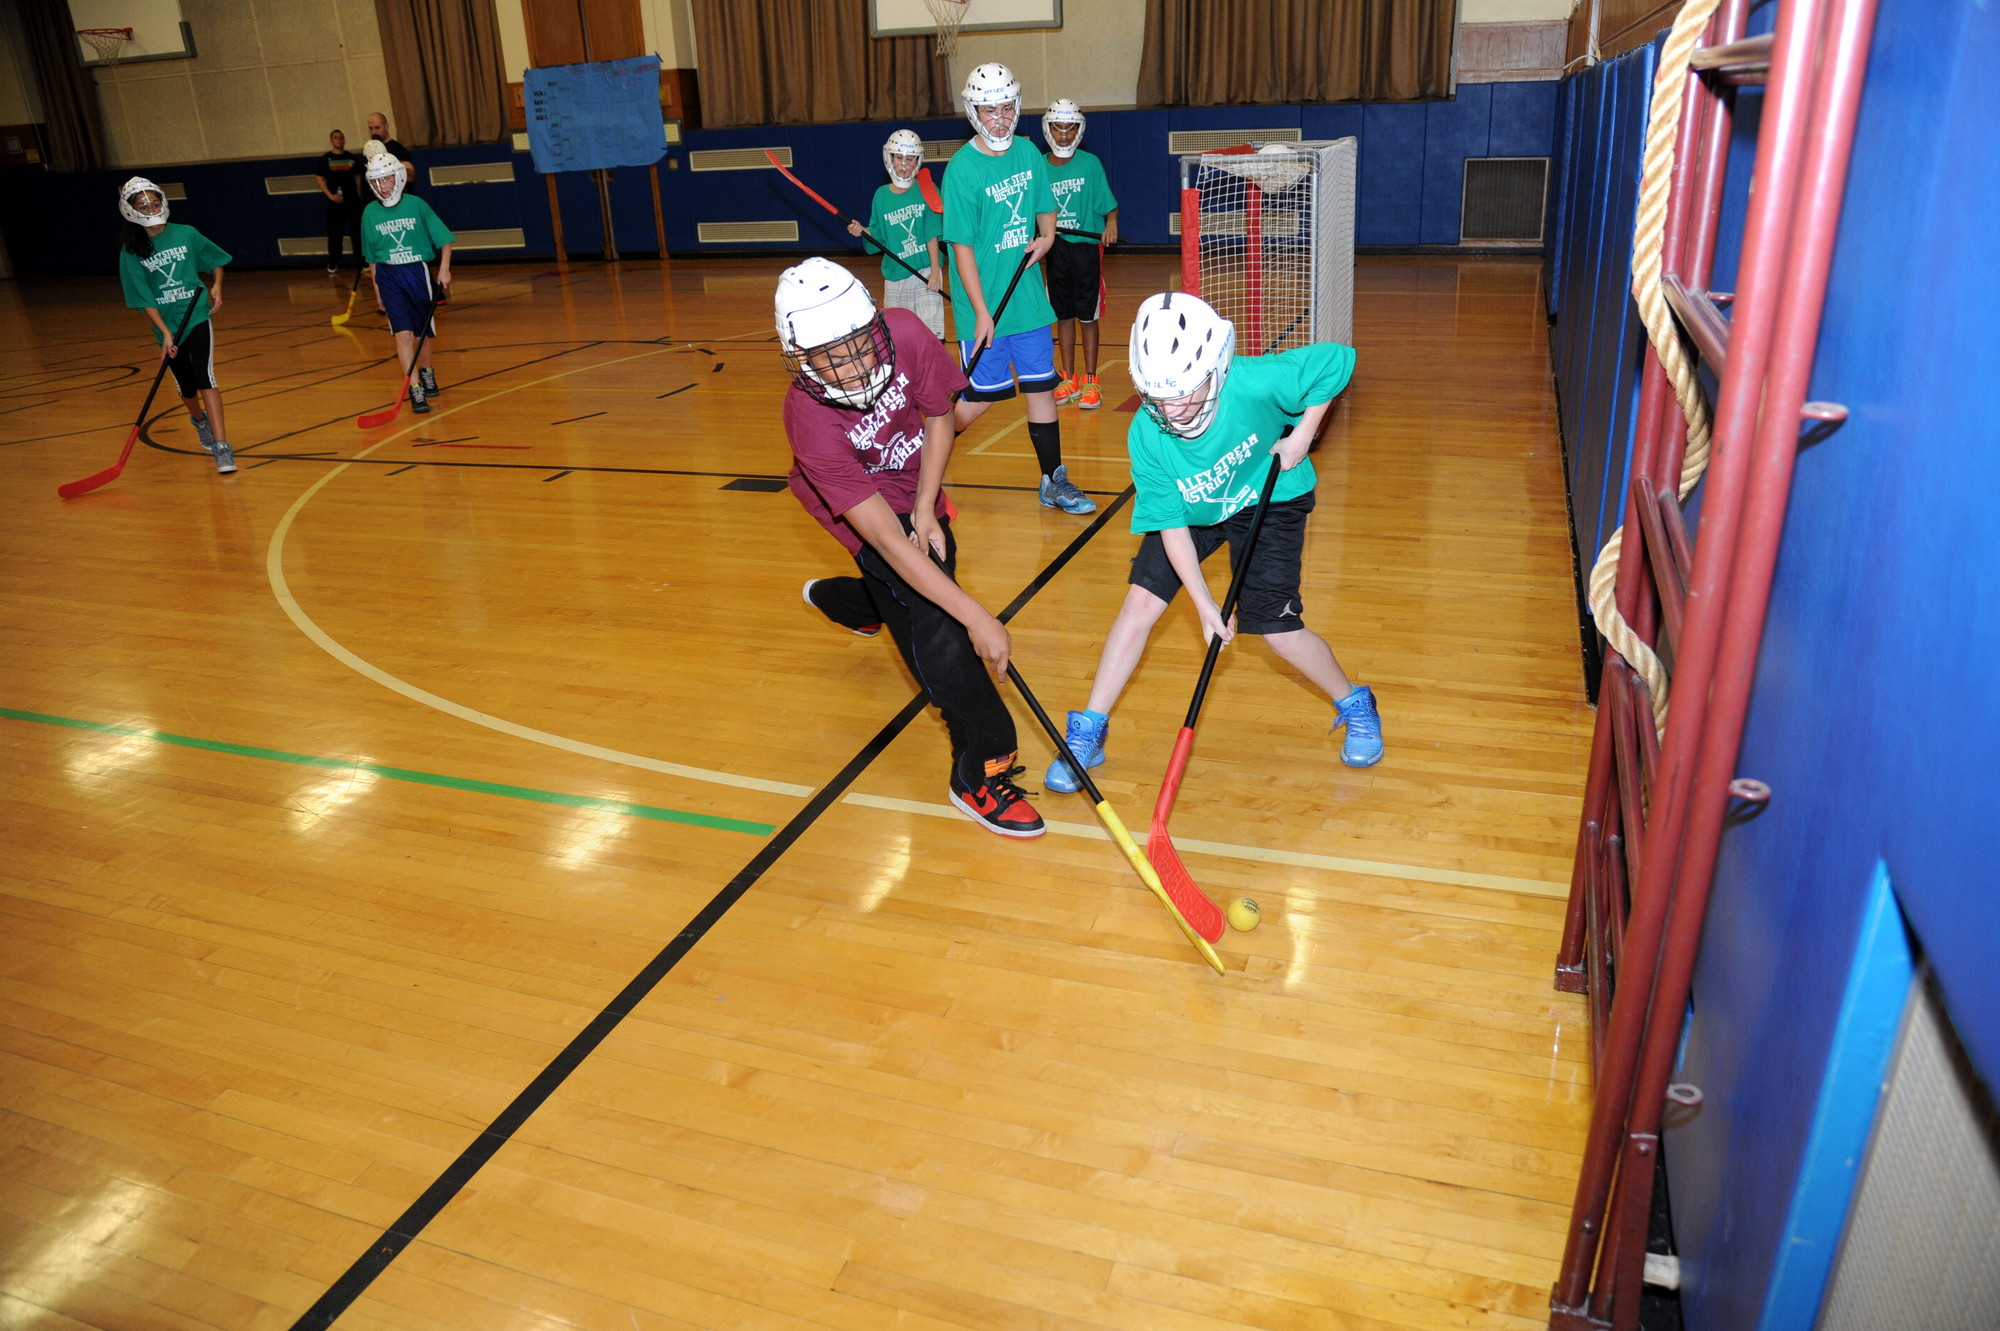 Players battled for the puck in the William L. Buck School gymnasium.